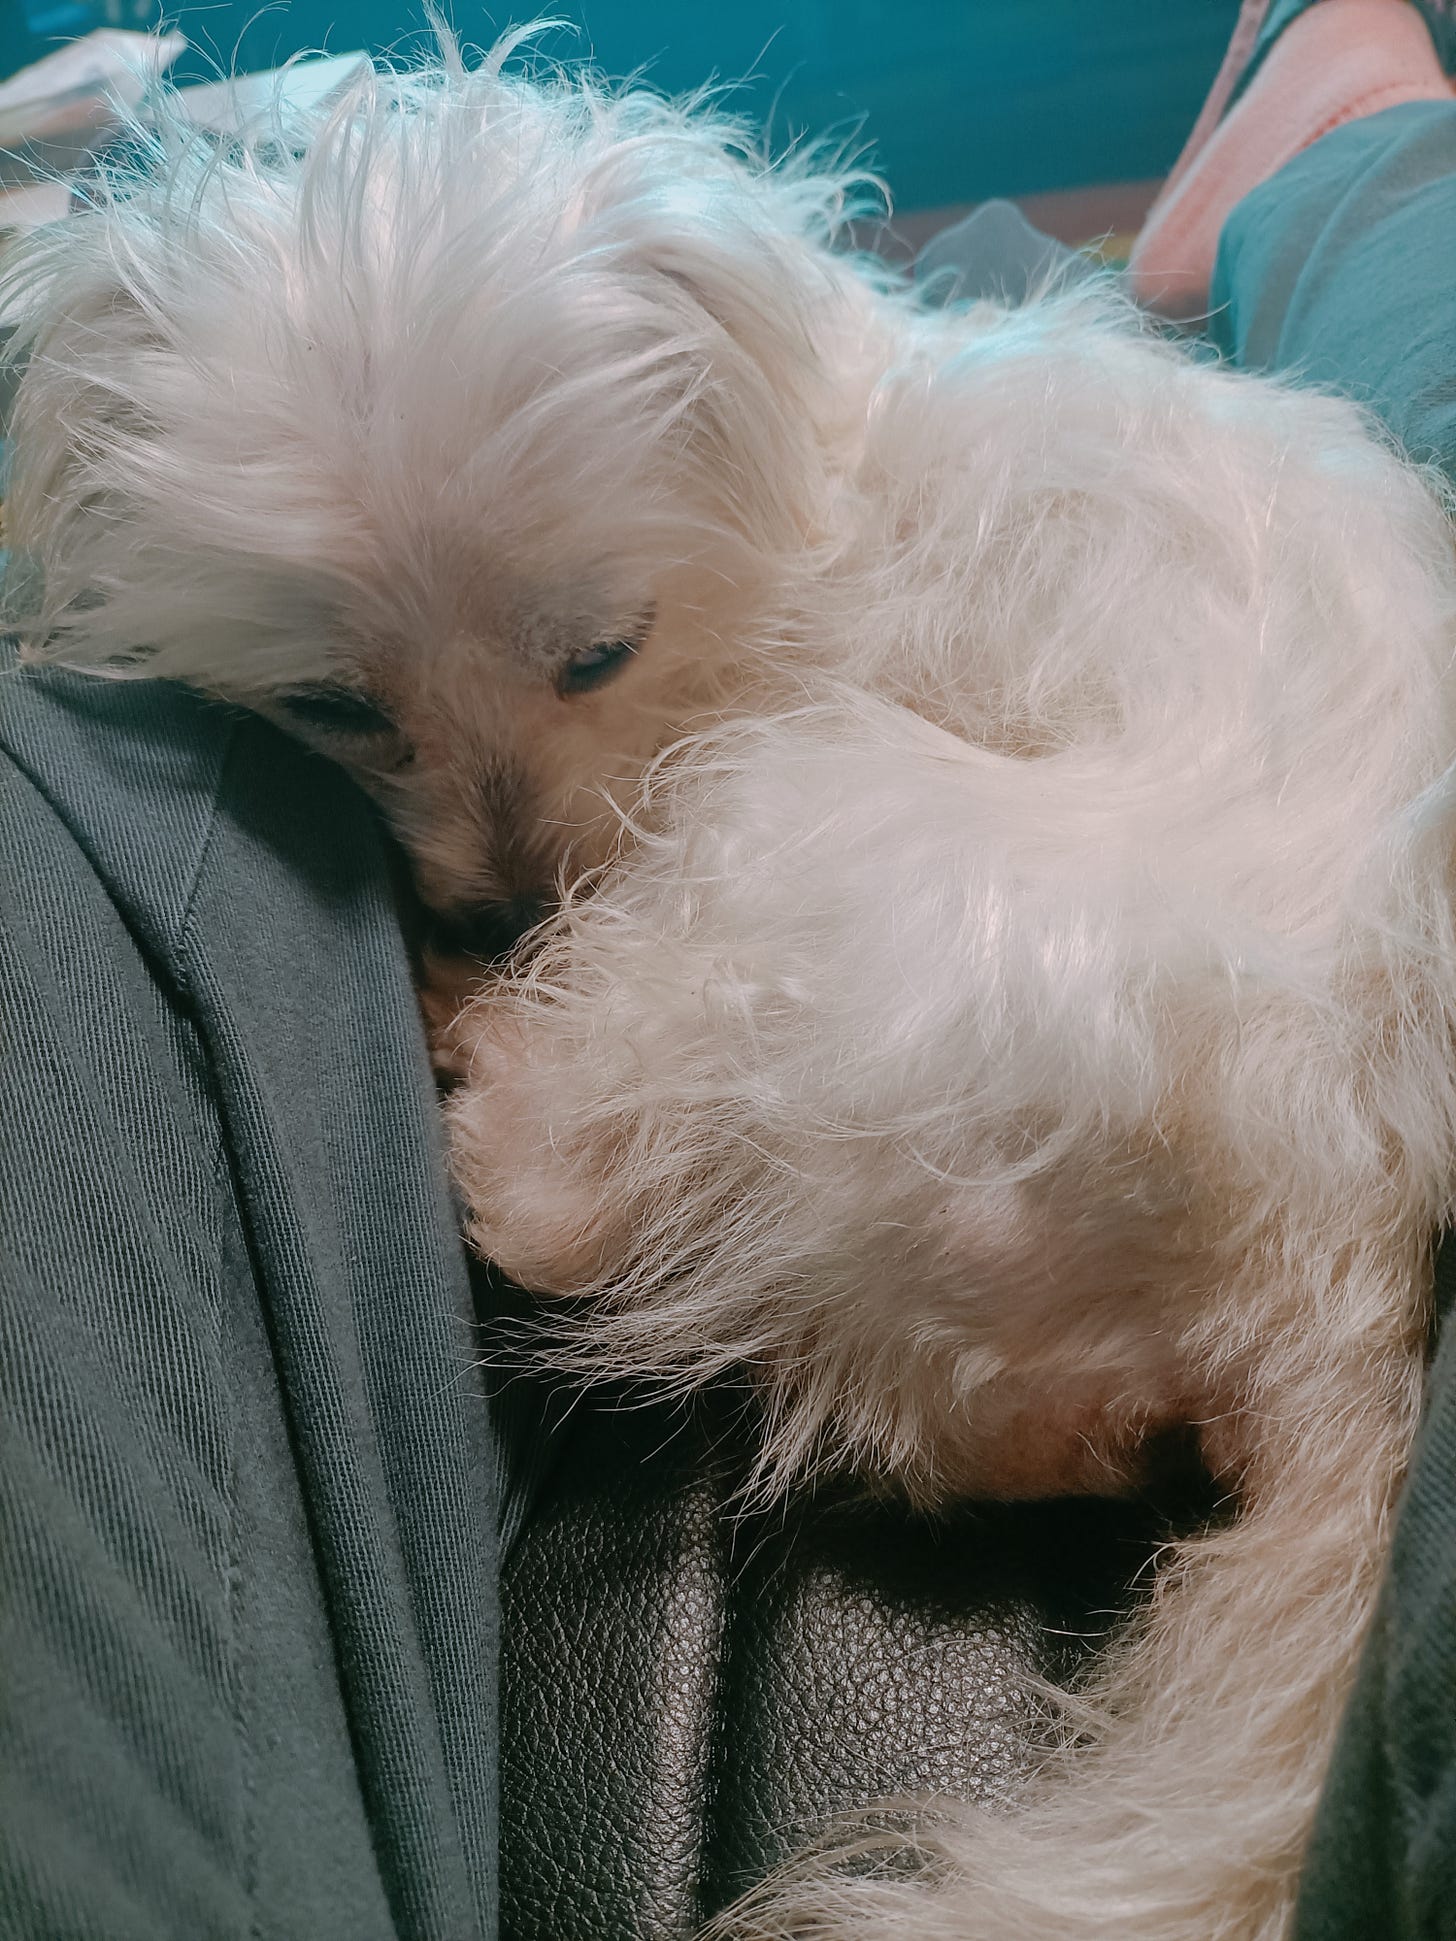 A photo of Donut, a white, puppy-sized Maltese mix with unruly long white fur, curled up in a lap. He is half-asleep but still giving severe side-eye.